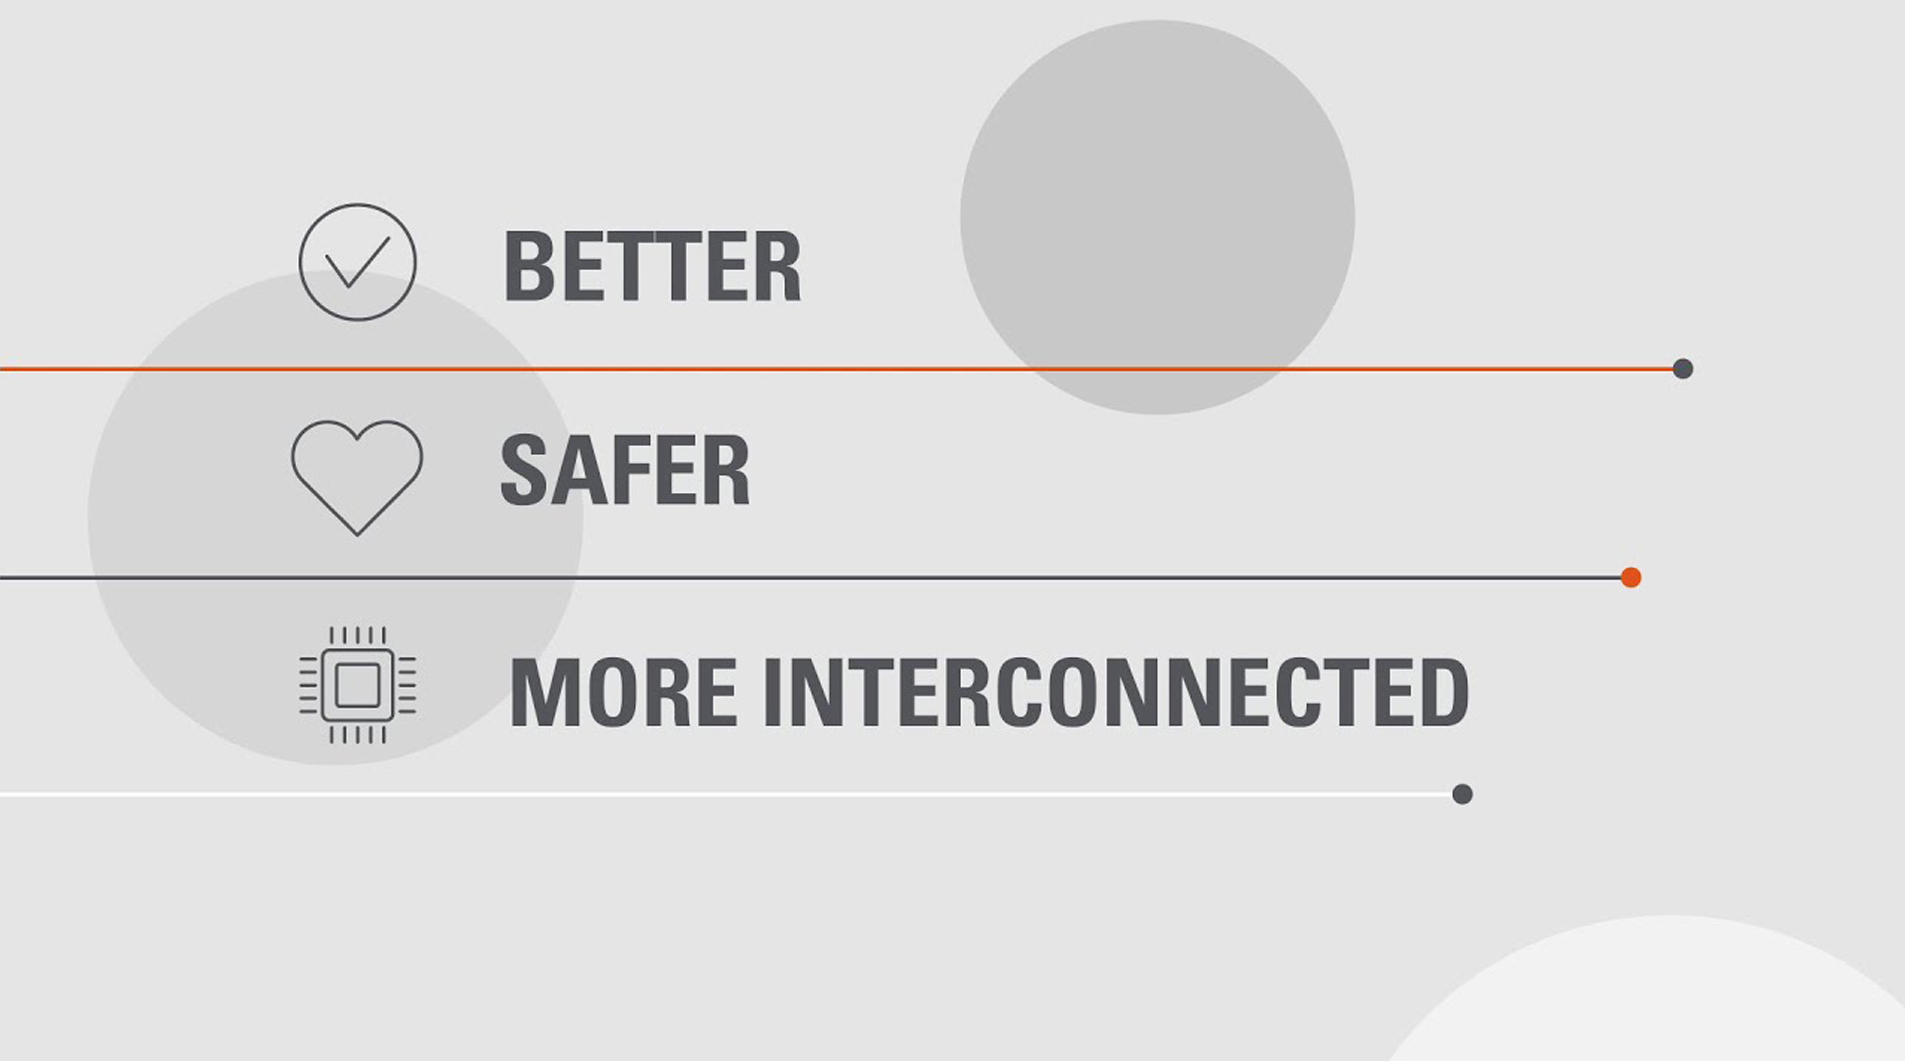 Better, Safer, and More Interconnected